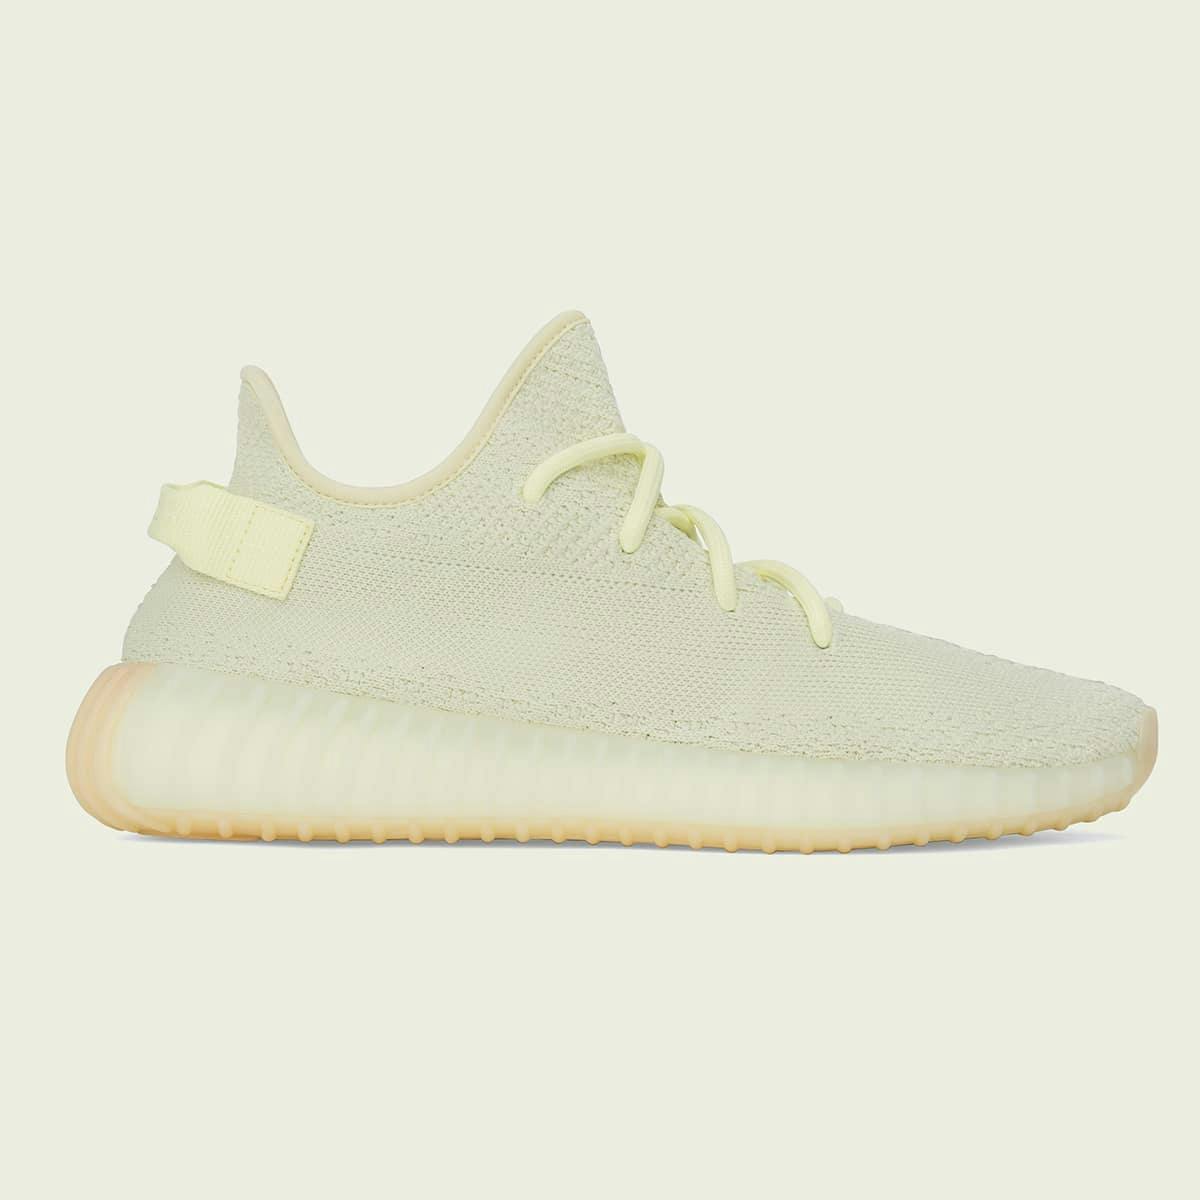 instruktør sneen etc adidas + KANYE WEST YEEZY BOOST 350 V2 'Butter' - Register Now on END. (US)  Launches | END. (US)